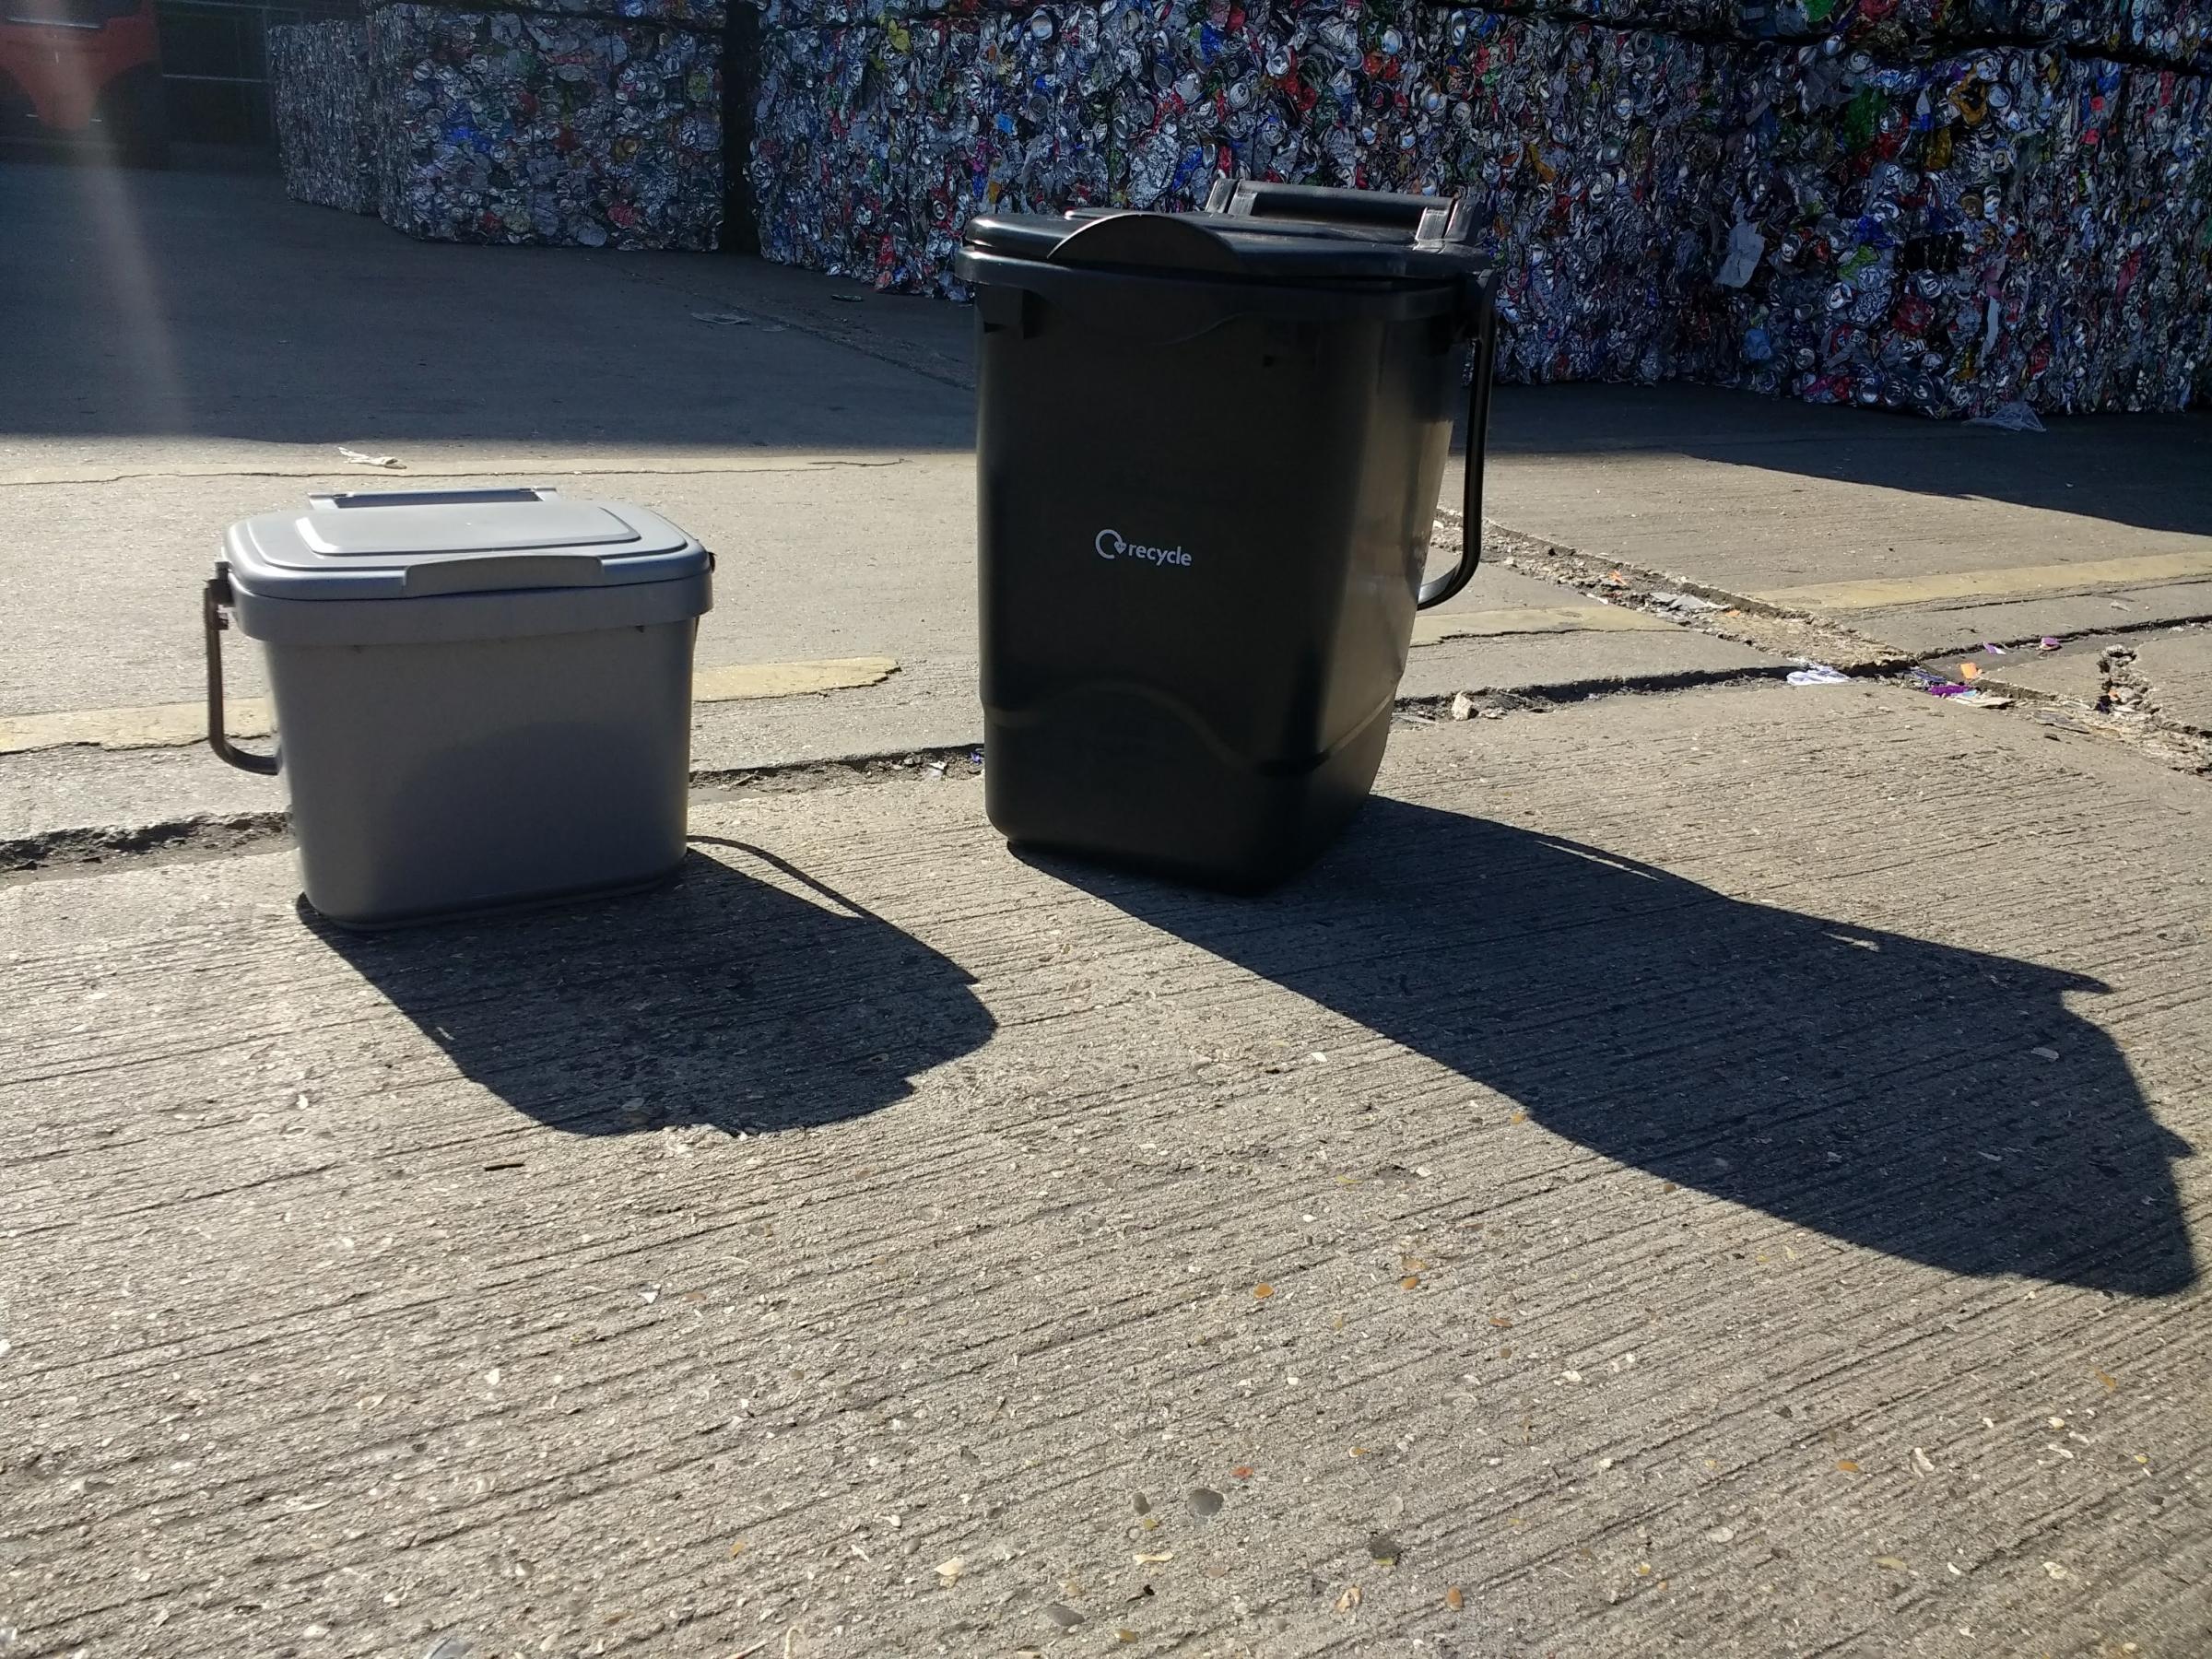 Food waste bins will be collected around the borough starting in October